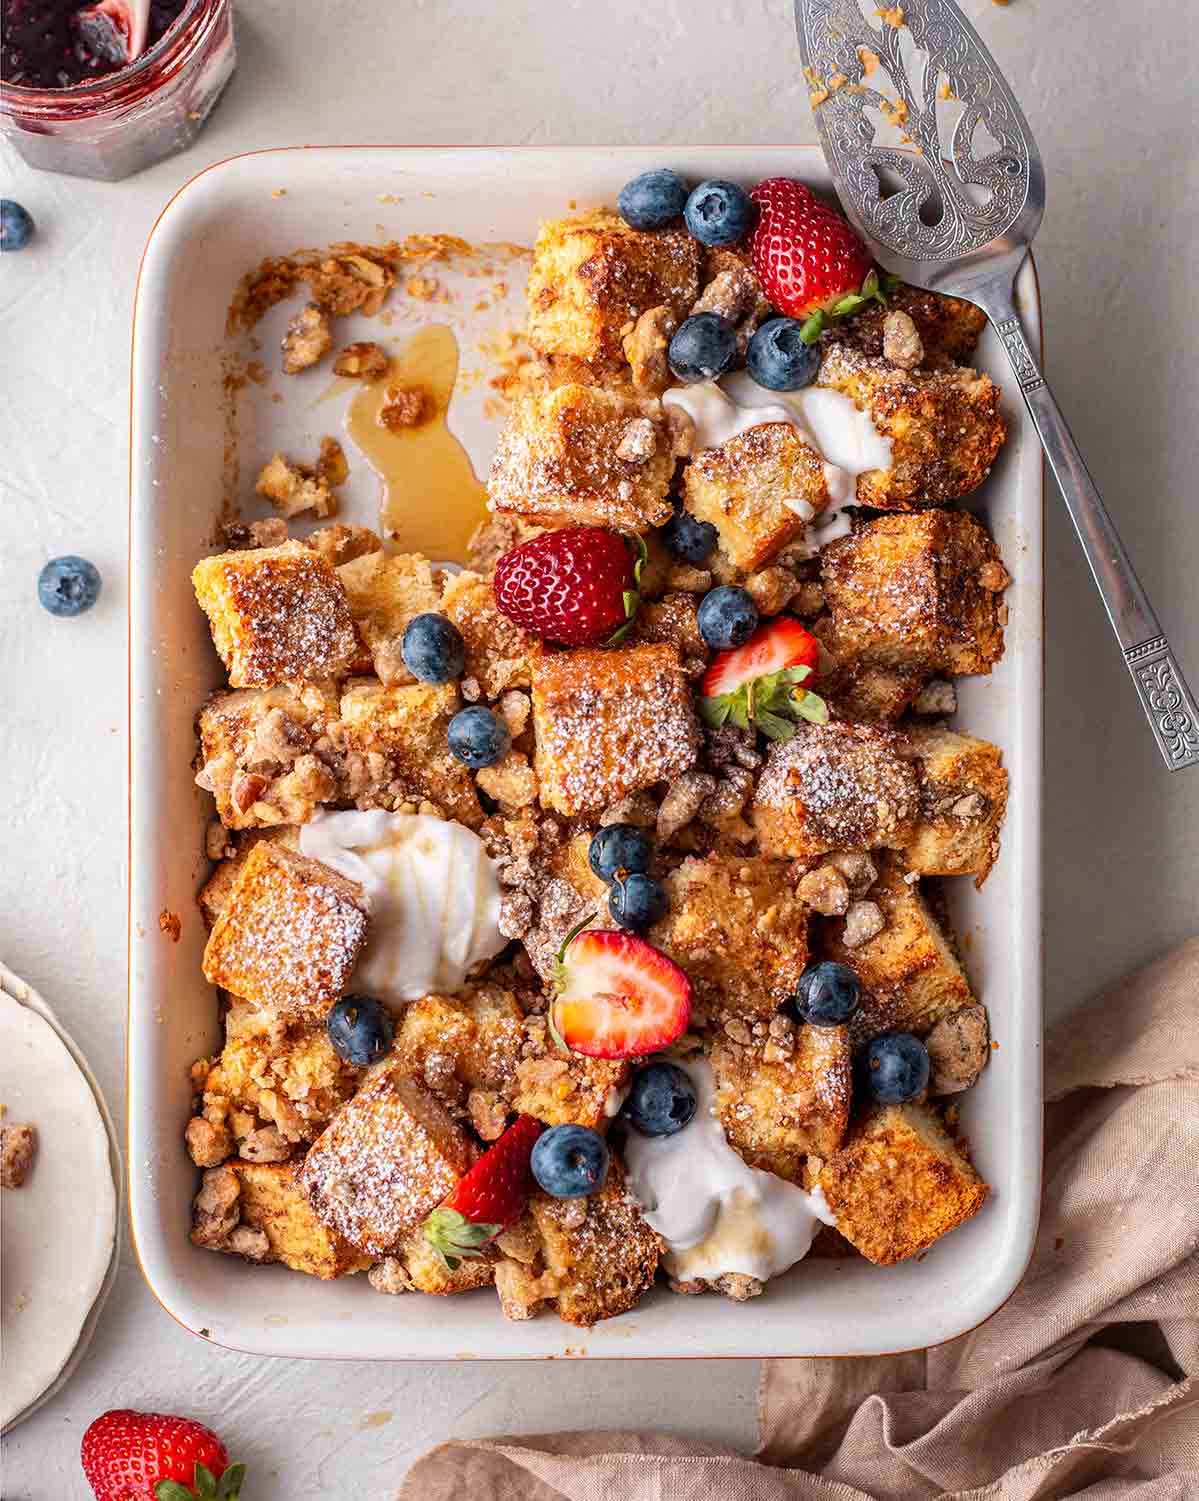 An overhead view of a vegan French toast casserole with berries, pecans, and cream on top.